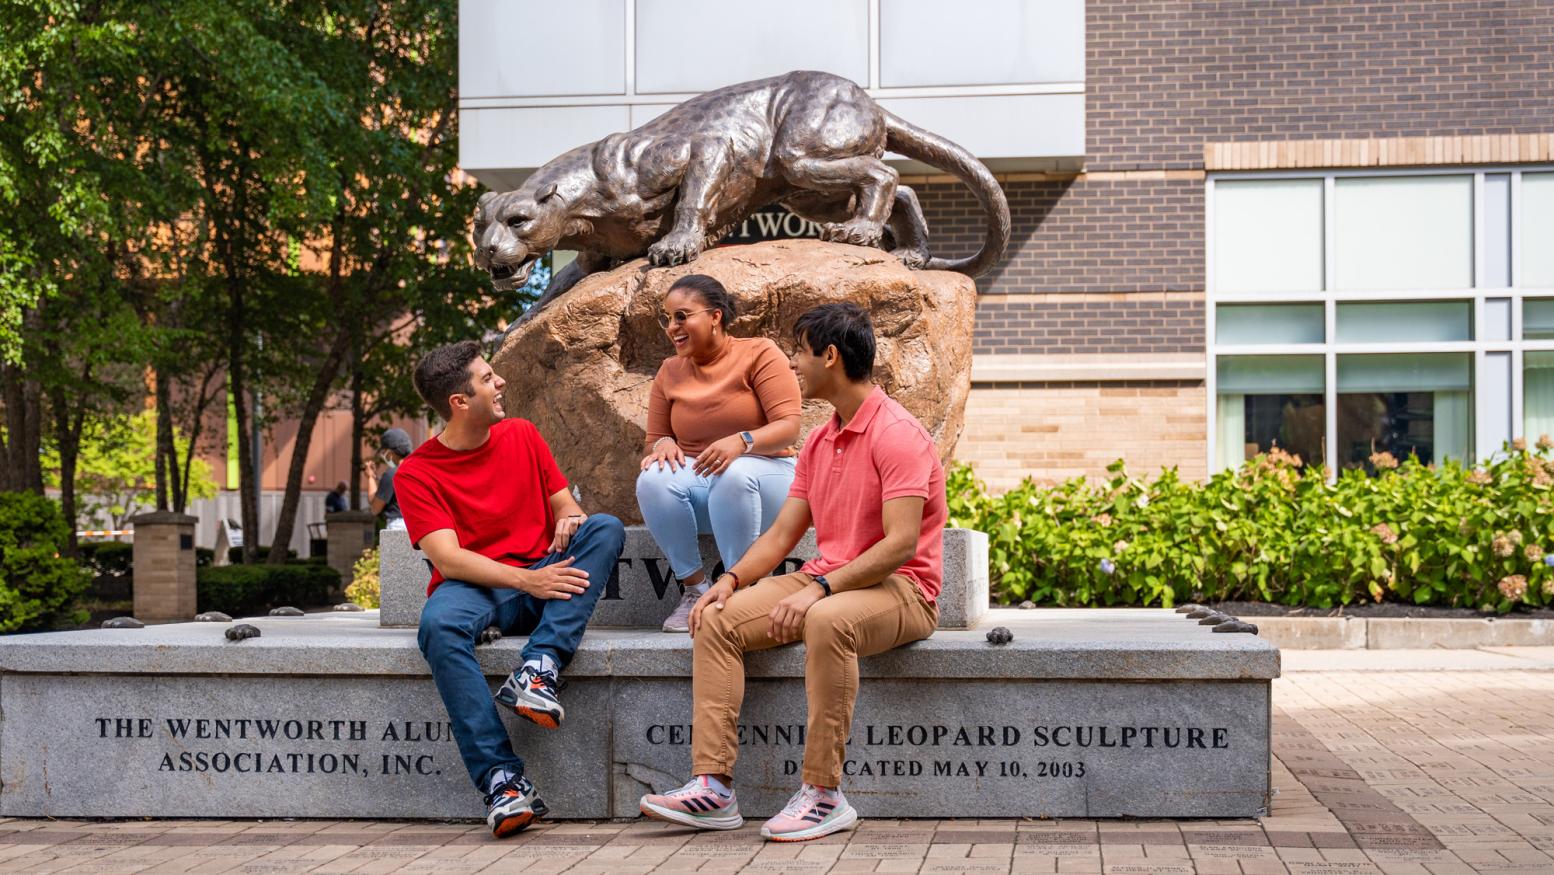 Three students smile and laugh in front of the Wentworth campus statue of a leopard